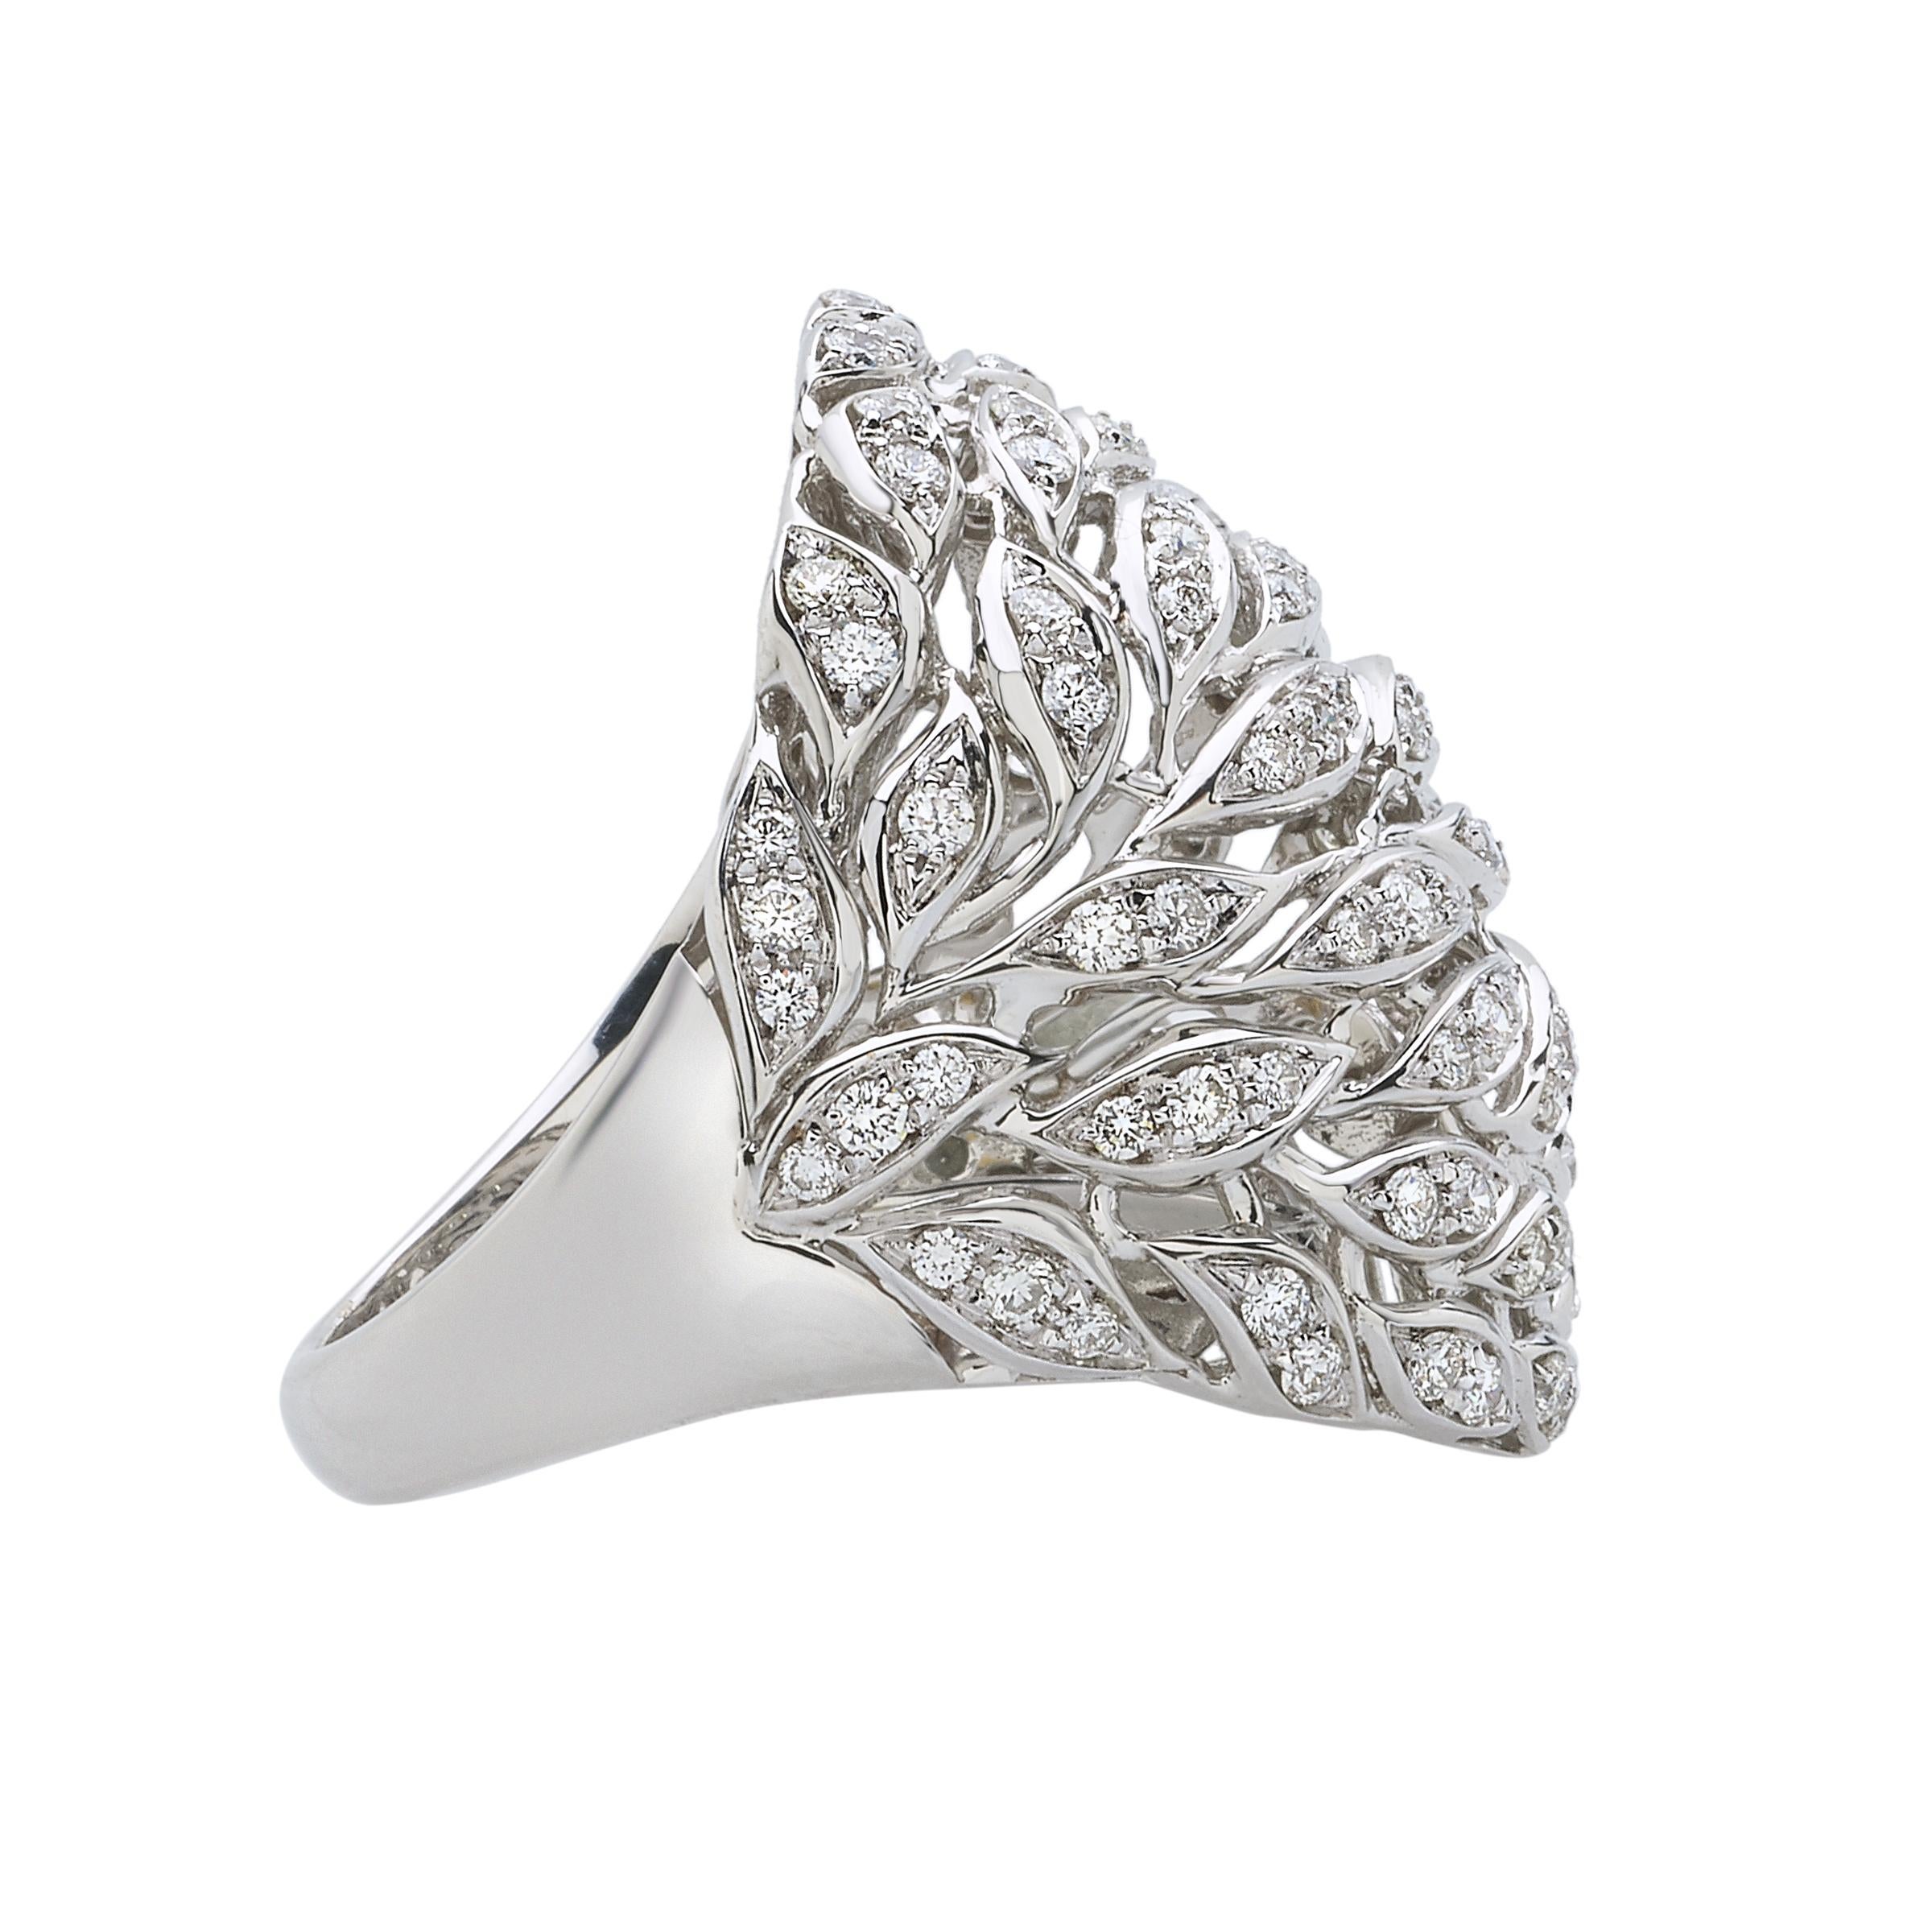 18 Carat White Gold Round Brilliant Cut Diamonds Ring featuring 1,33 carats of diamonds G color, VVS clarity; total piece weight 14,30 gr. Size 8 US, 57 EU
Handmade in Italy, ready in stock
Each Luca Carati creation is delivered with its original